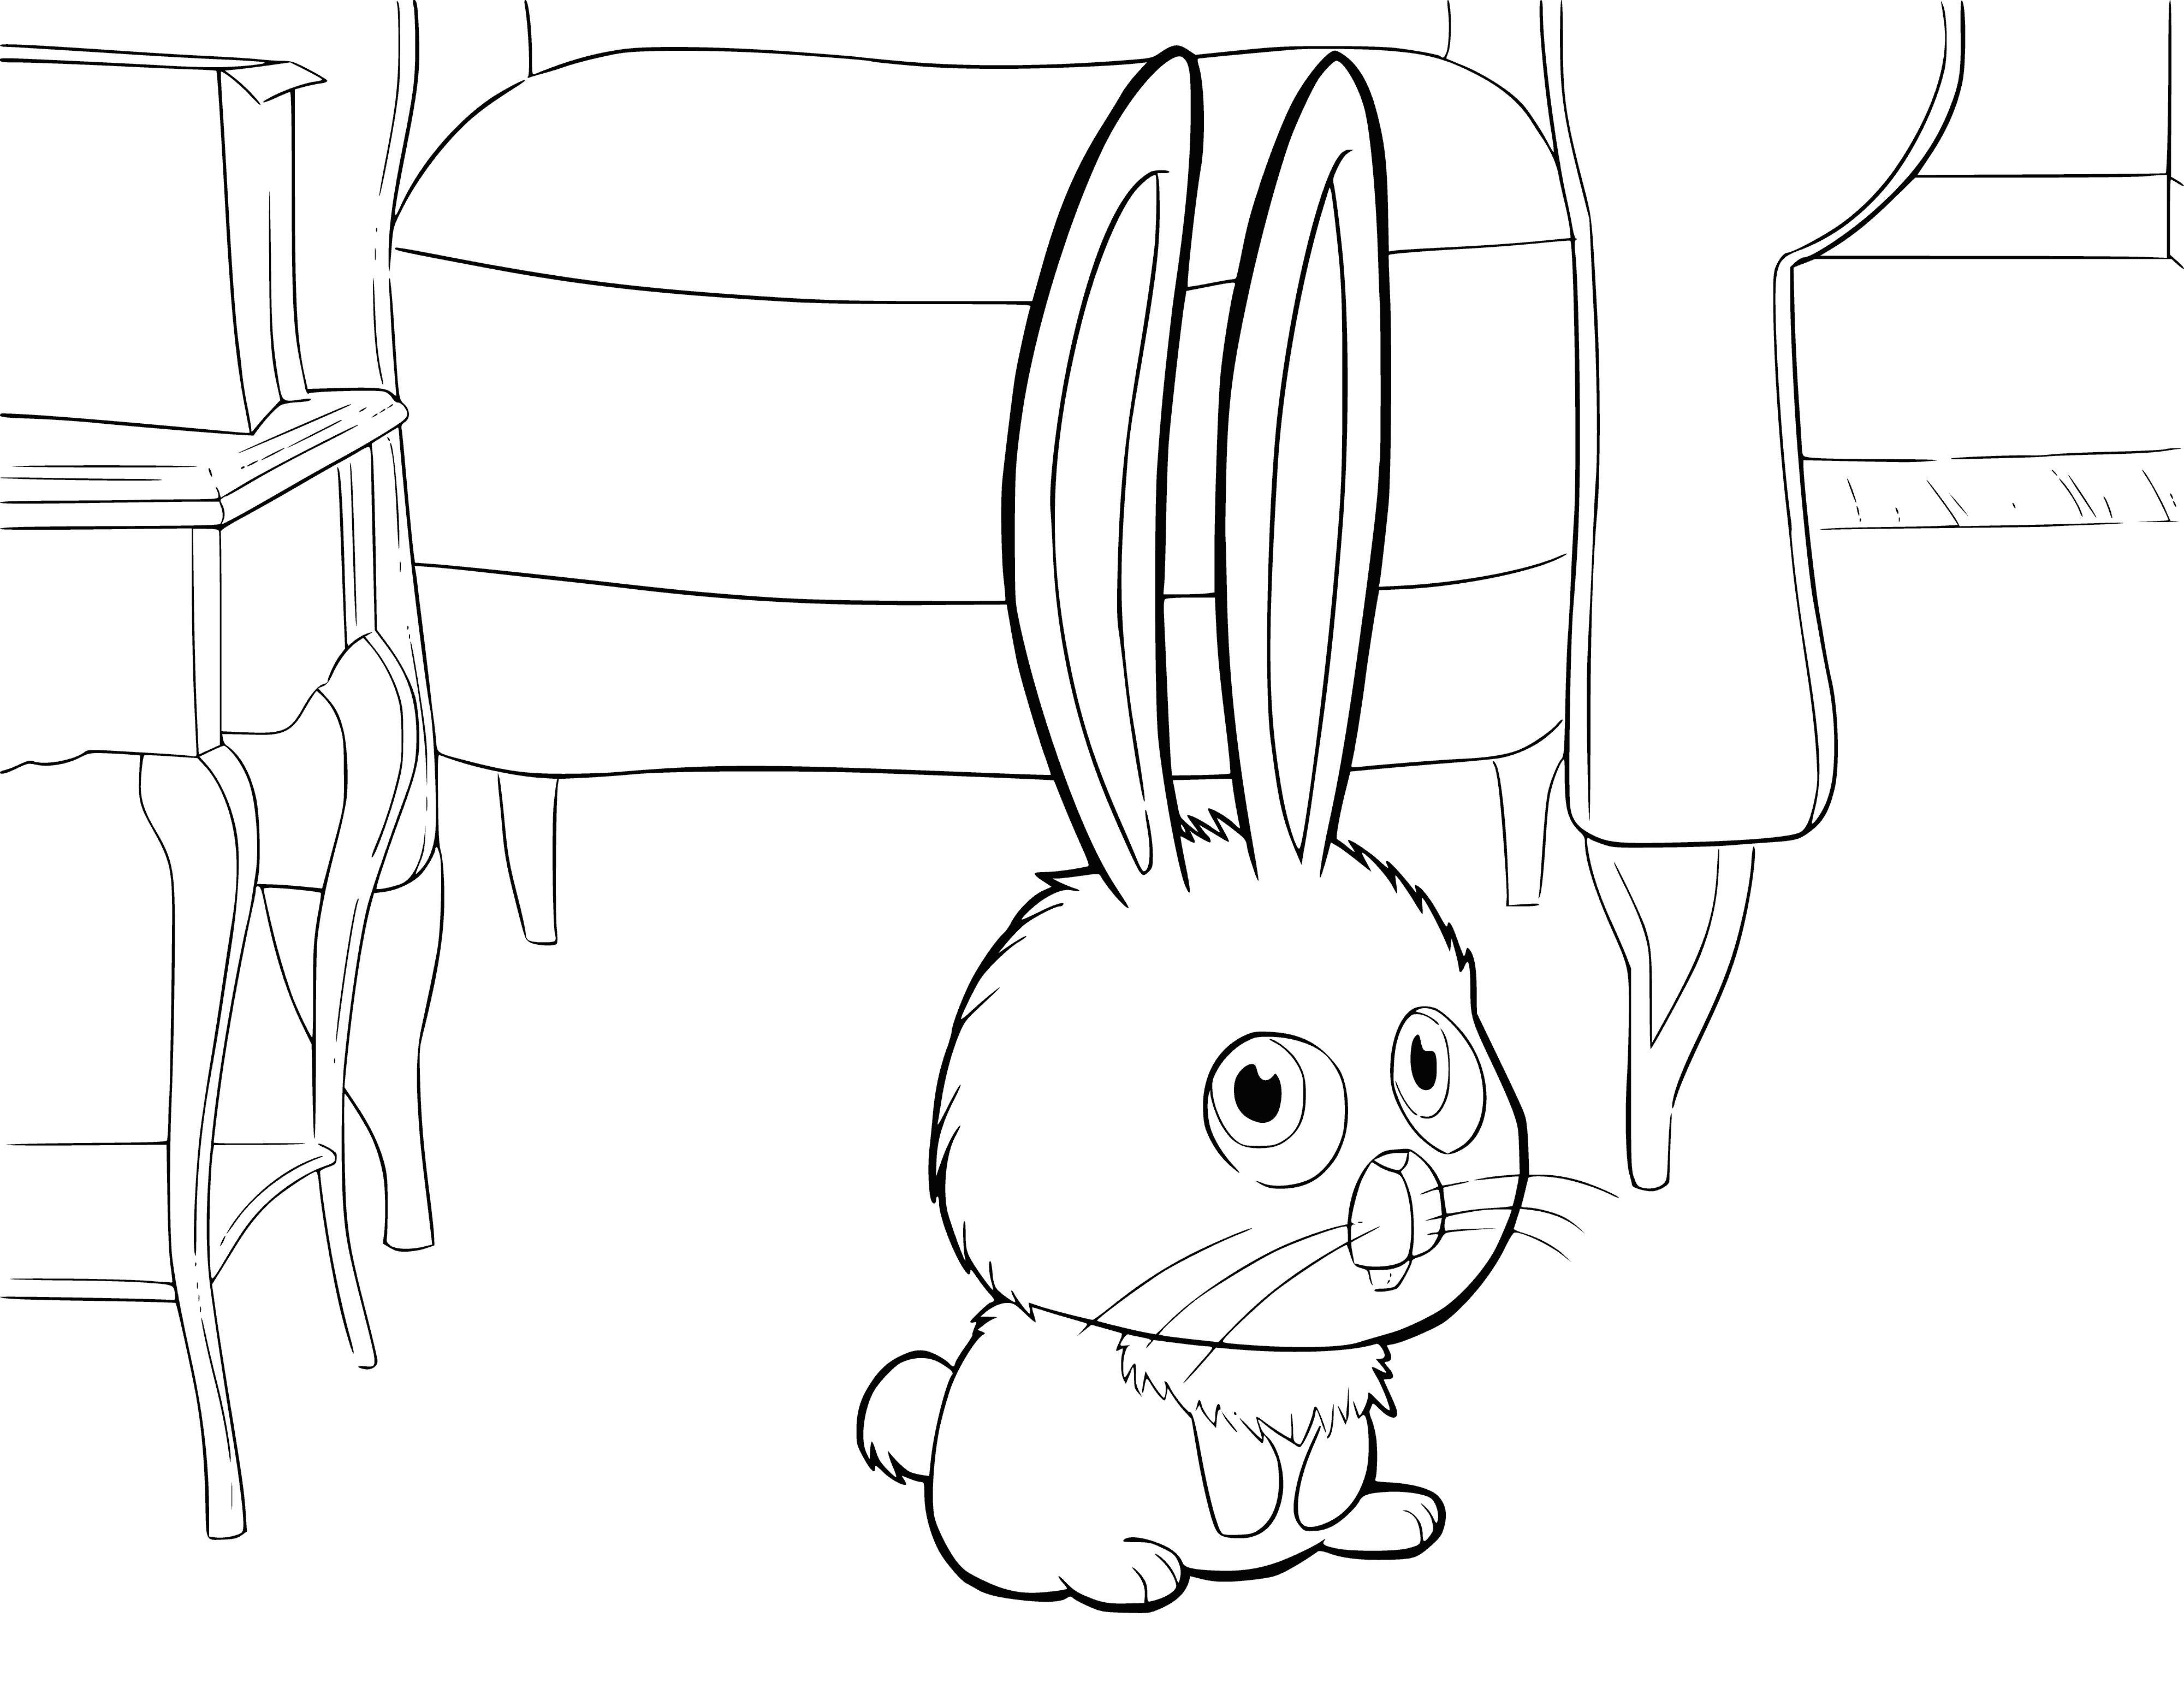 Rabbit Snowball coloring page